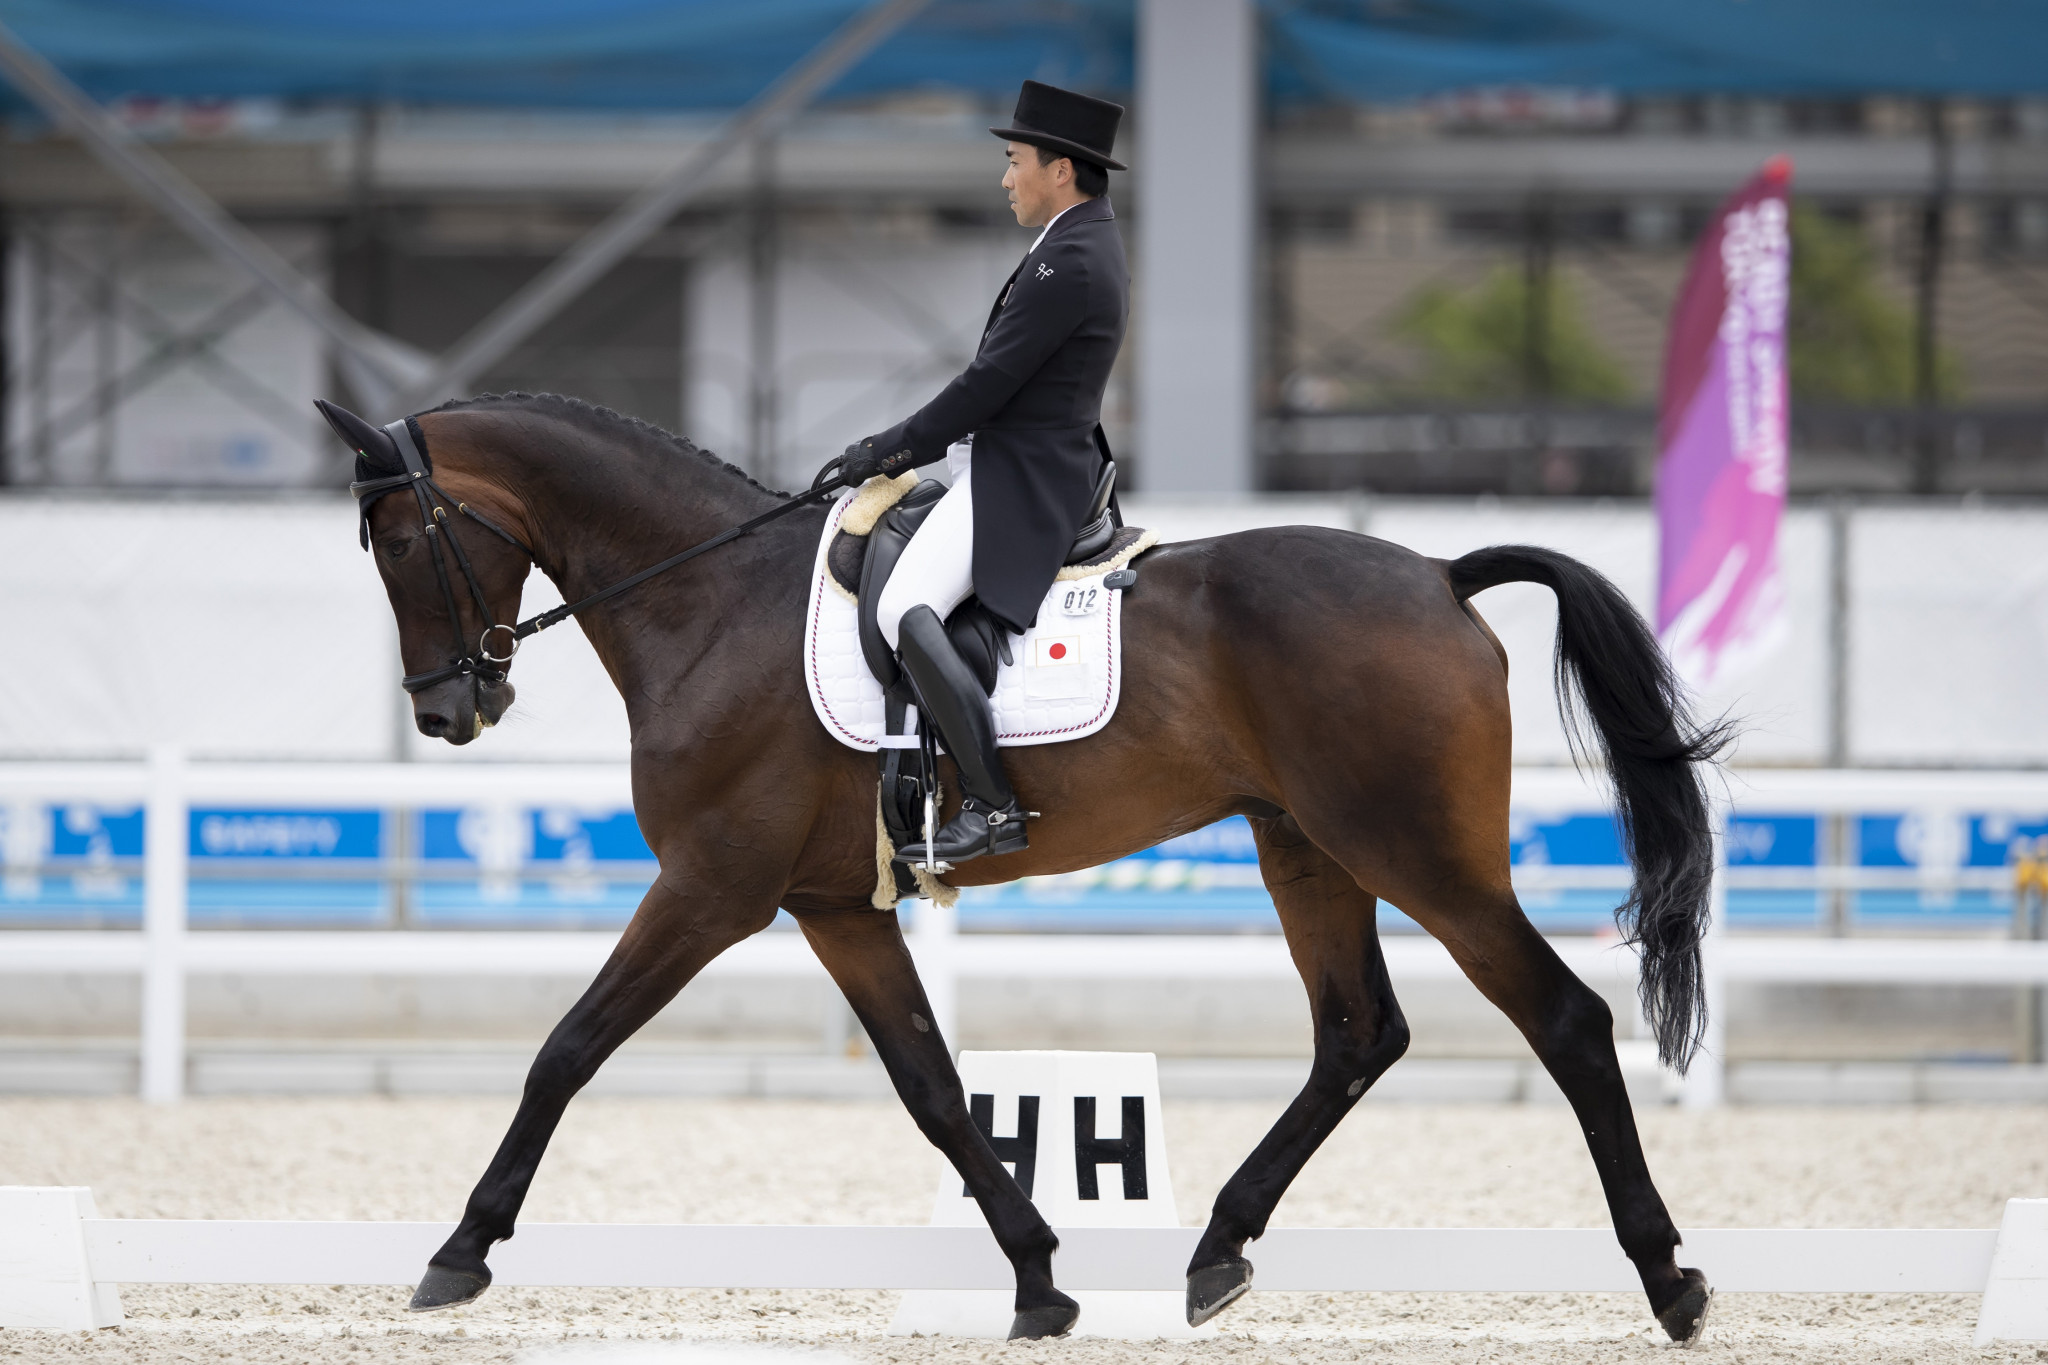 Home favourite Oiwa takes early lead at Tokyo 2020 eventing test event